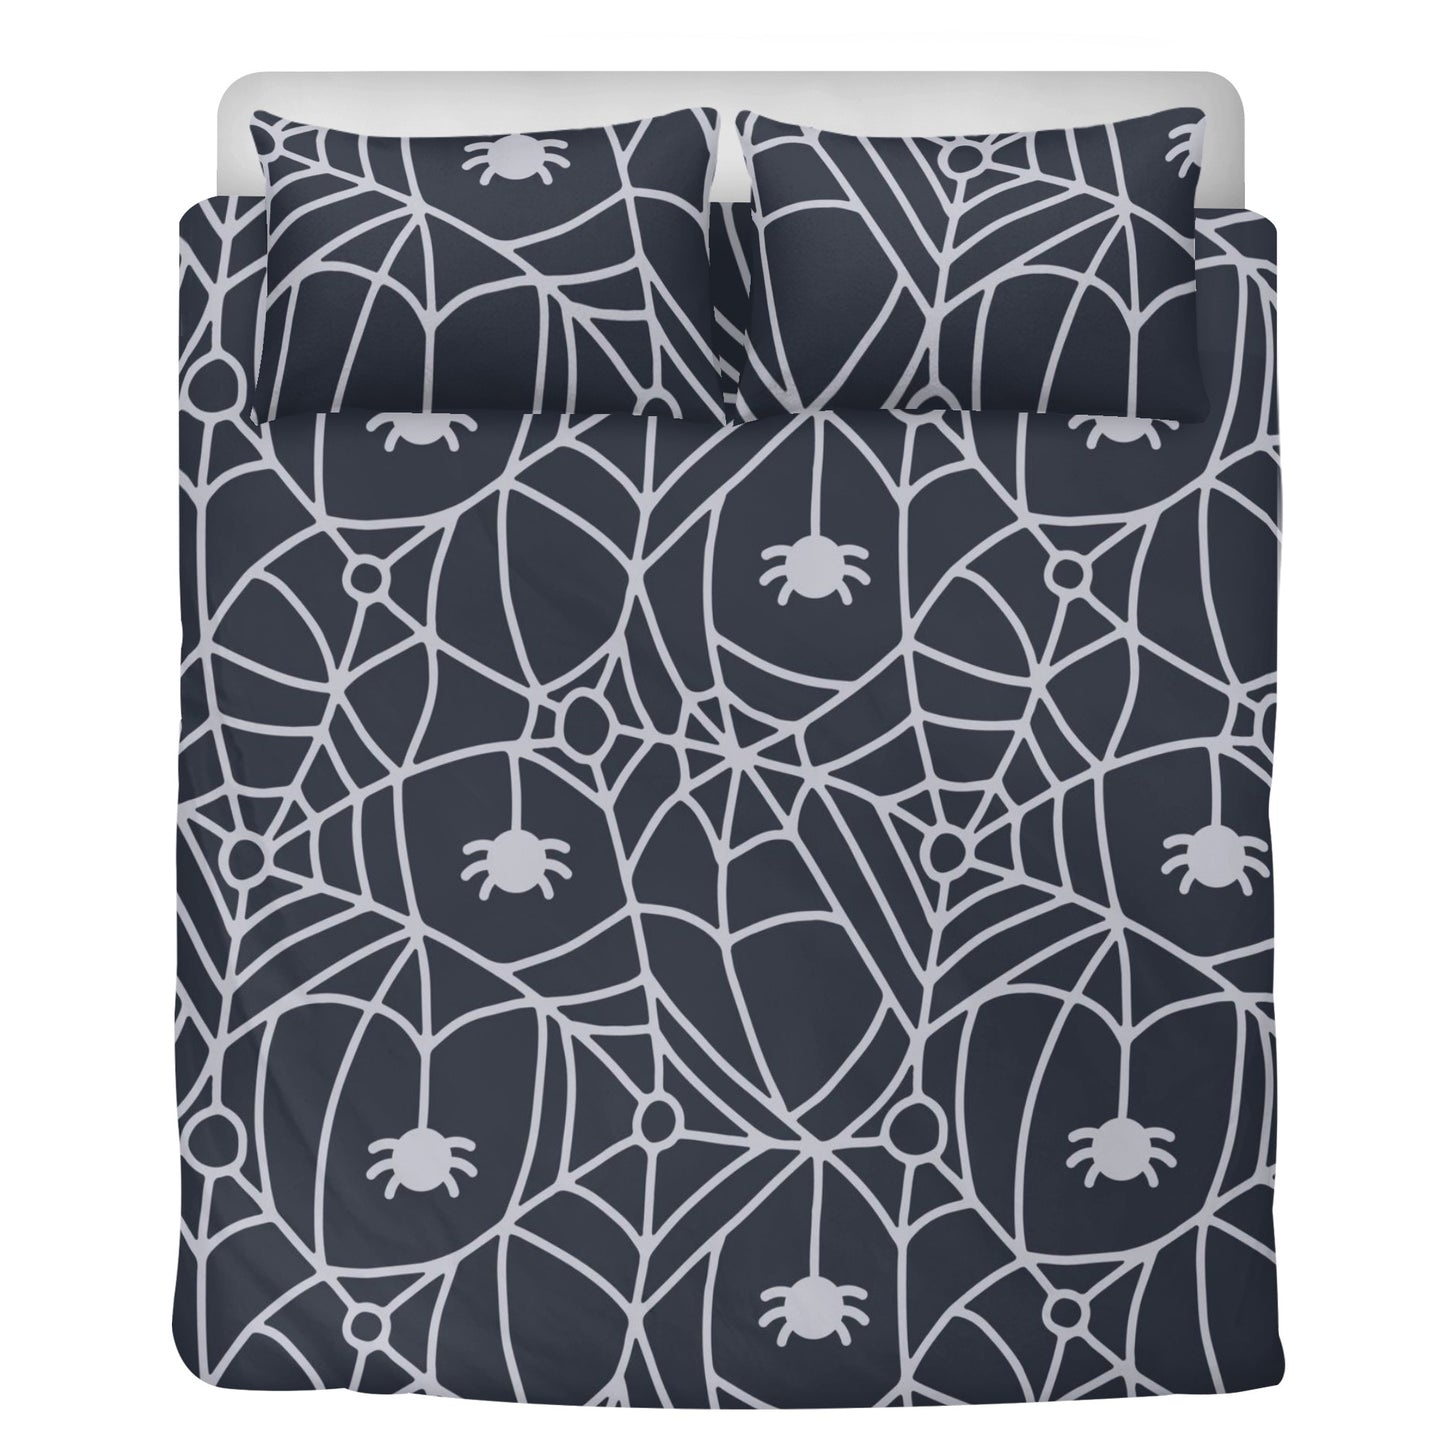 Dangling Spider And Spider Webs 3 Pcs Beddings